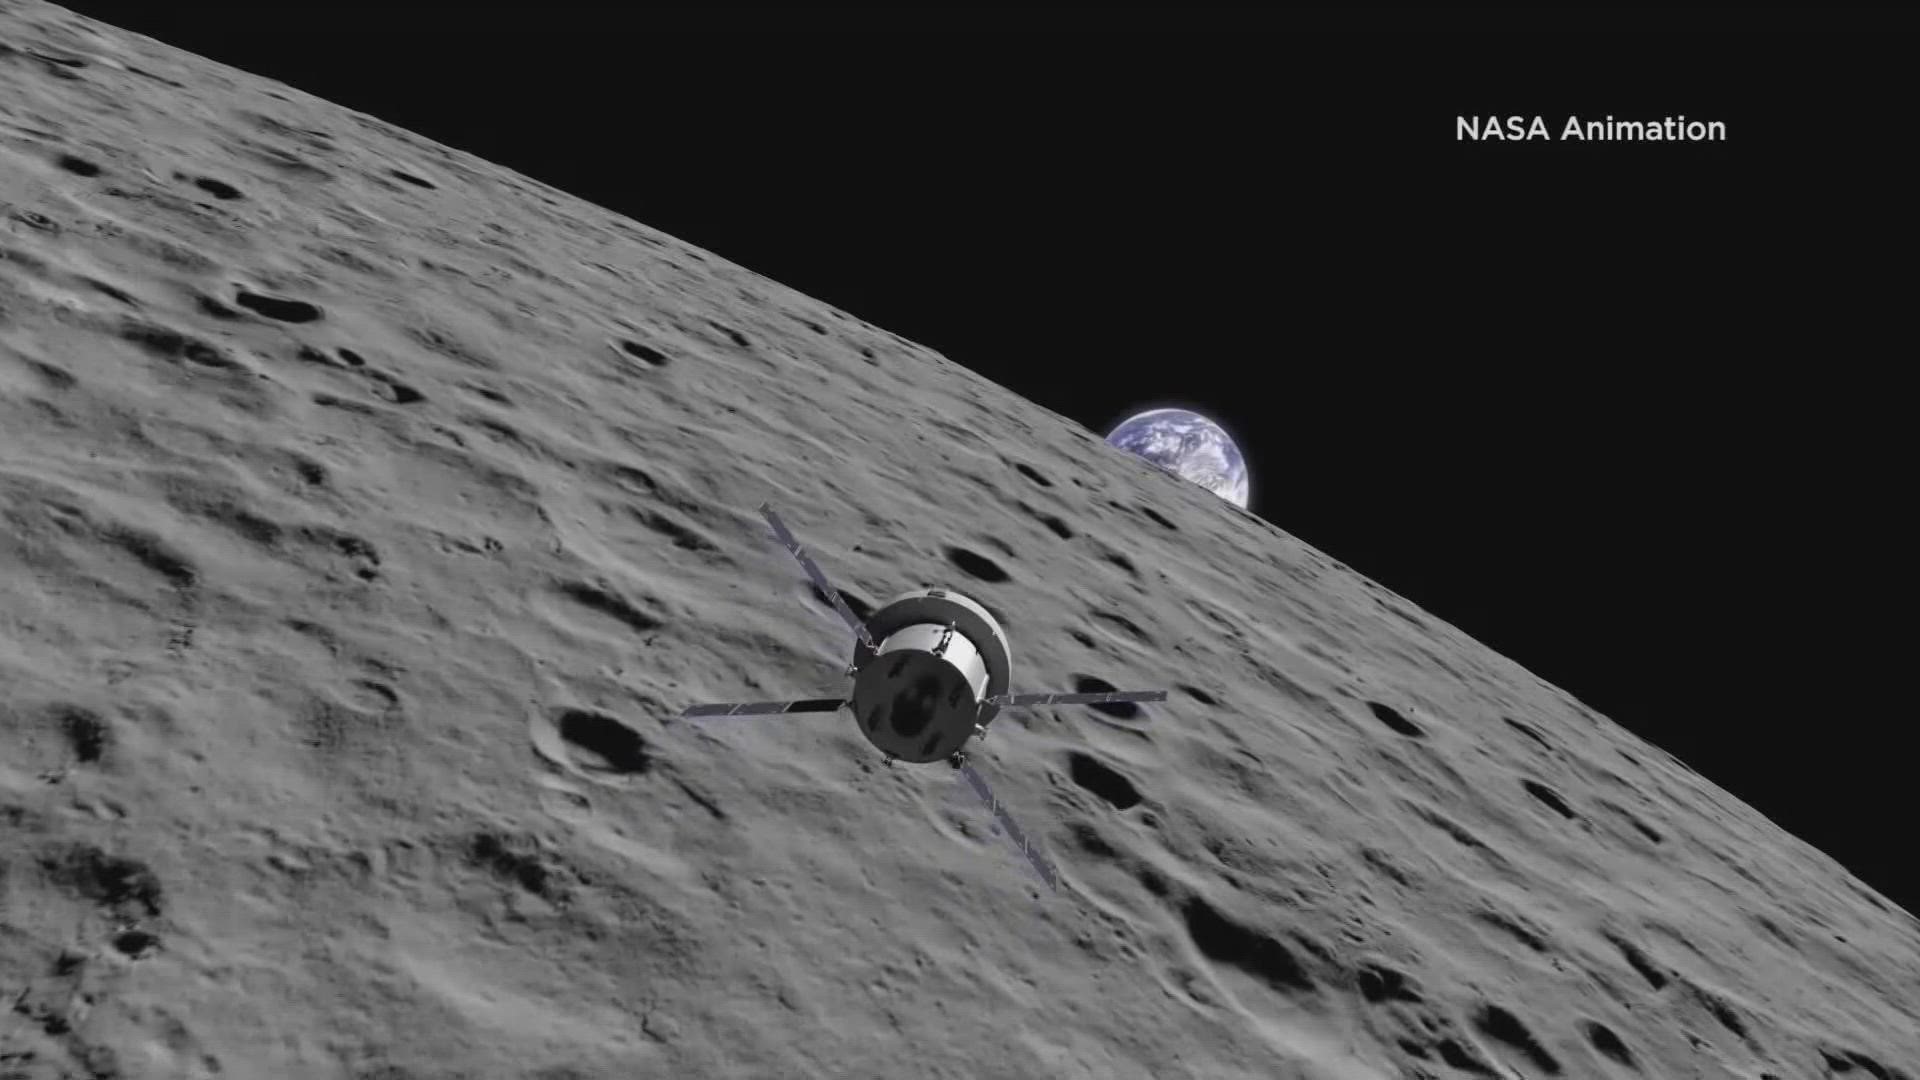 In exciting news, NASA hopes to send four astronauts around the moon on its next flight in 2024 before landing humans back on the moon as early as 2025.